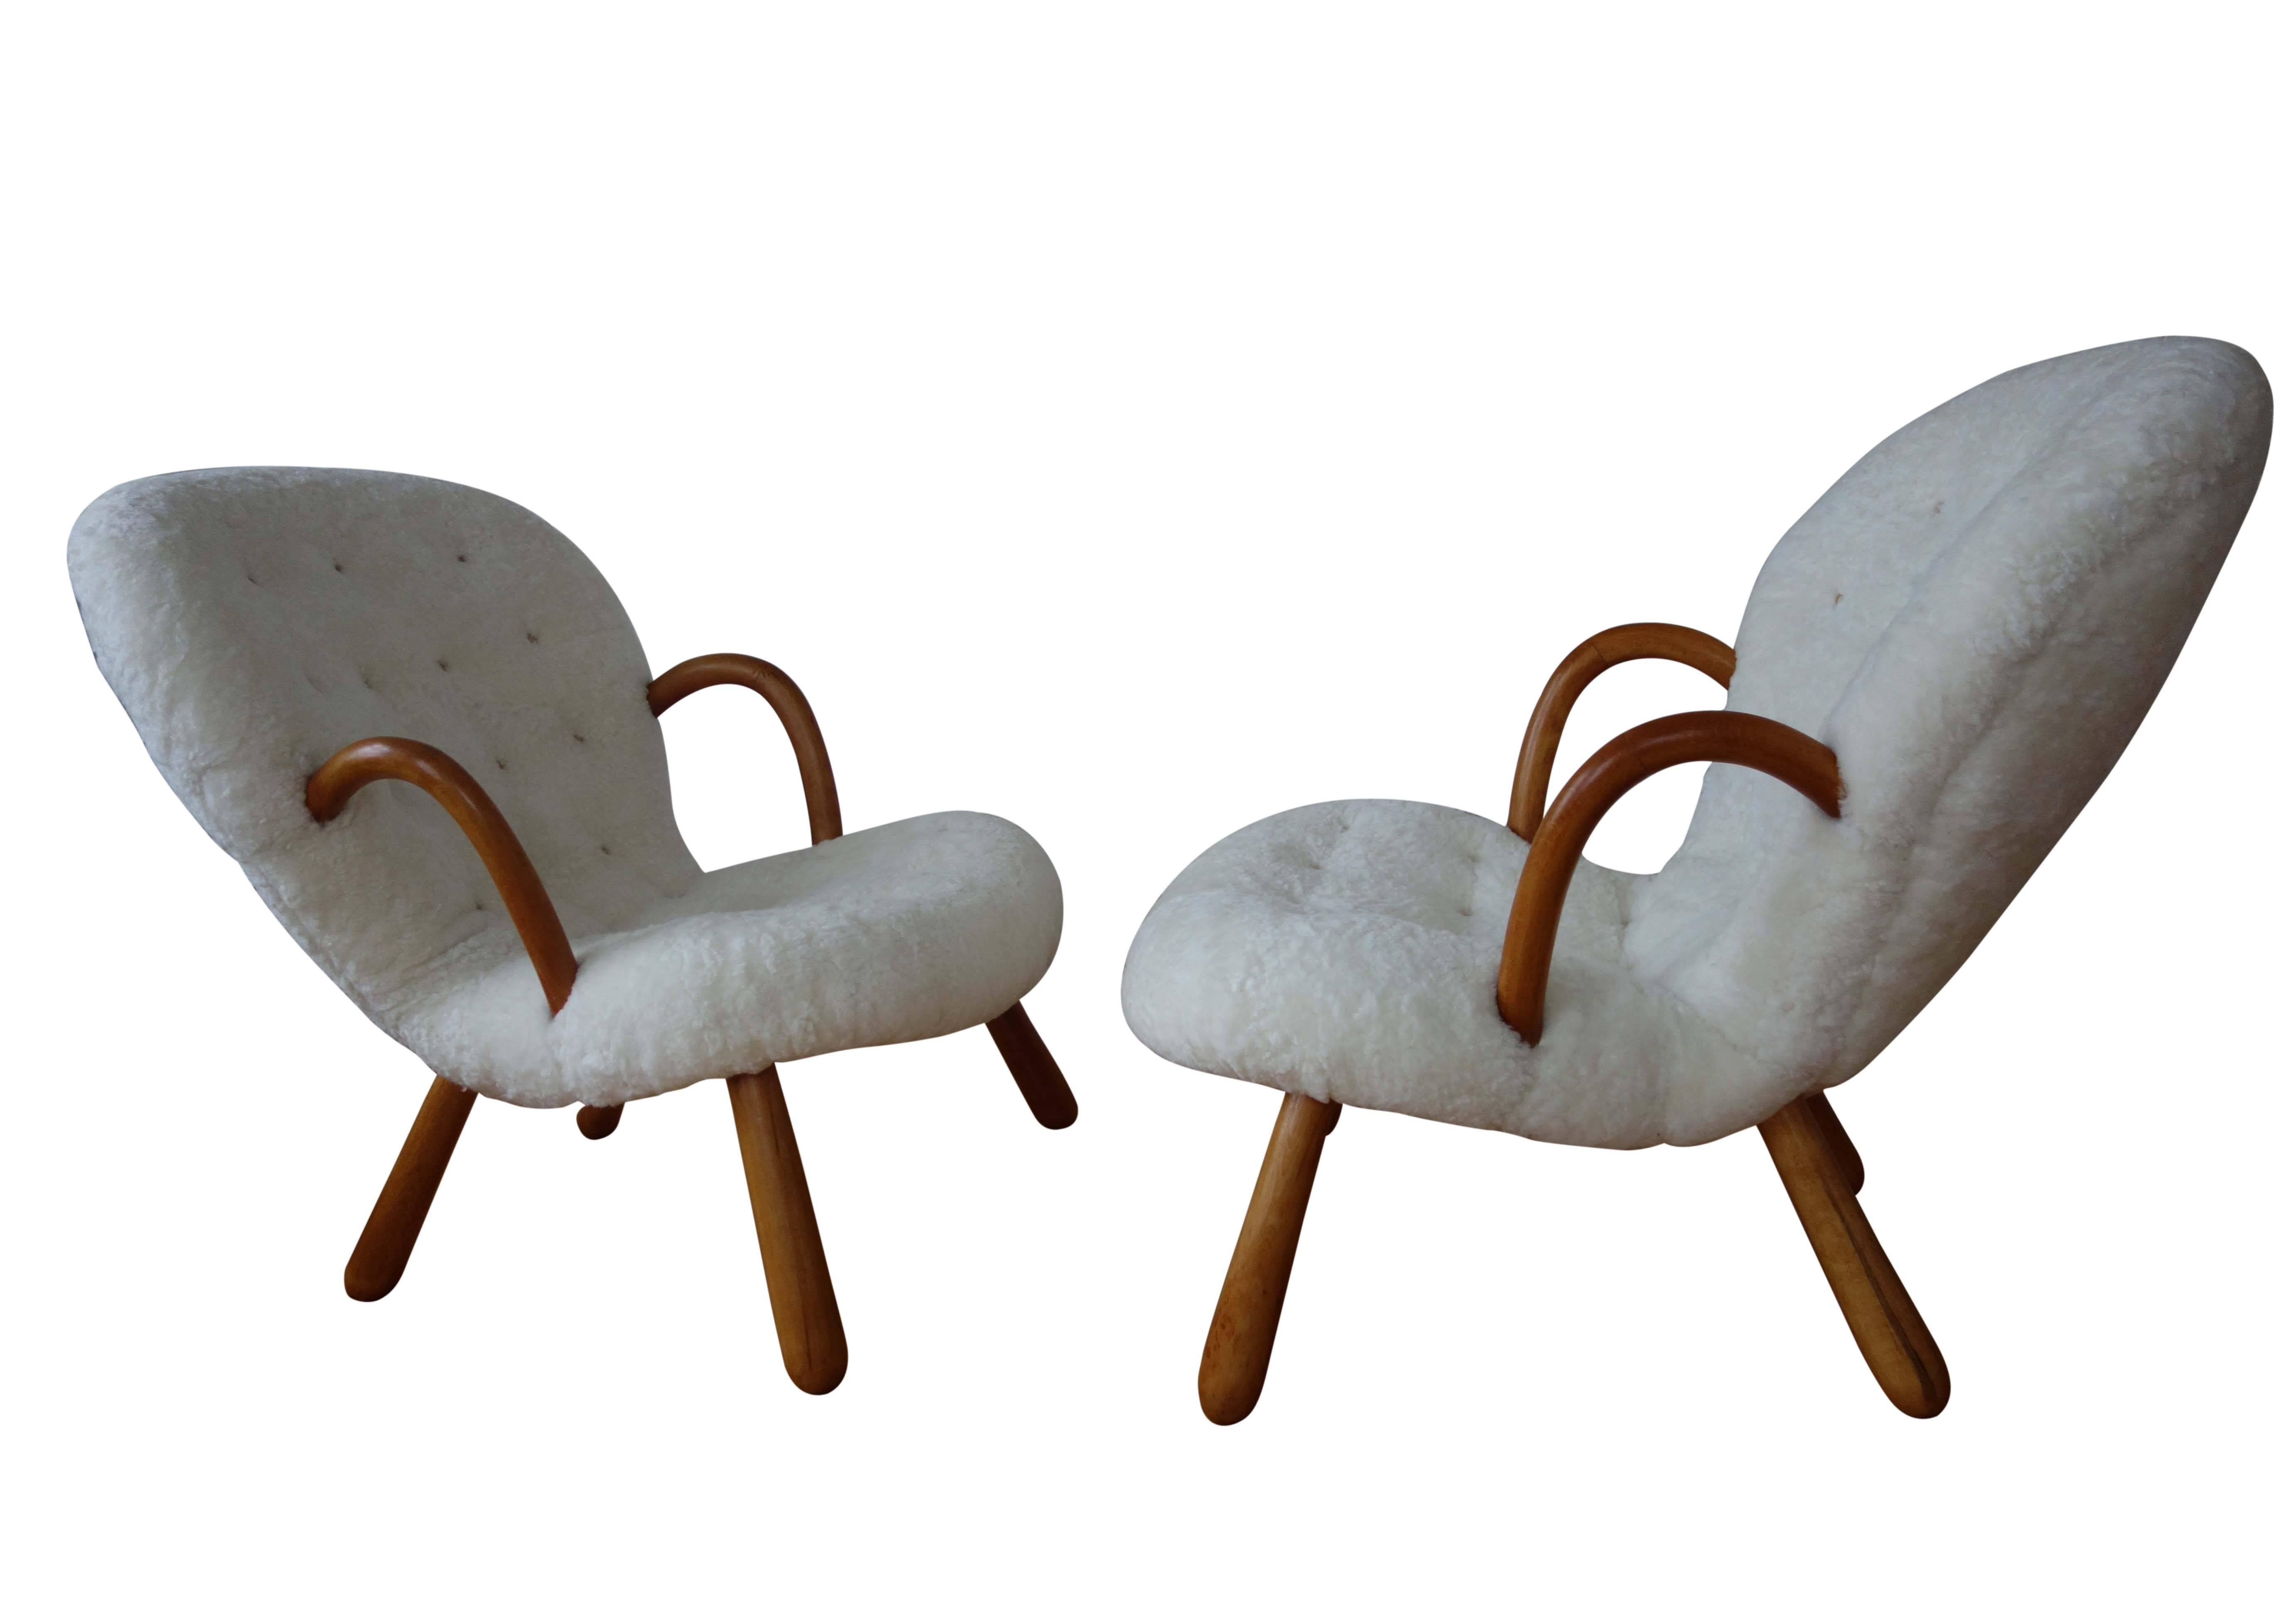 Pair of Philip Arctander 'clam' easy chairs in sheepskin and beech. Buttons in natural leather.

Price is for the pair.

Single chair is also available. Contact for details.